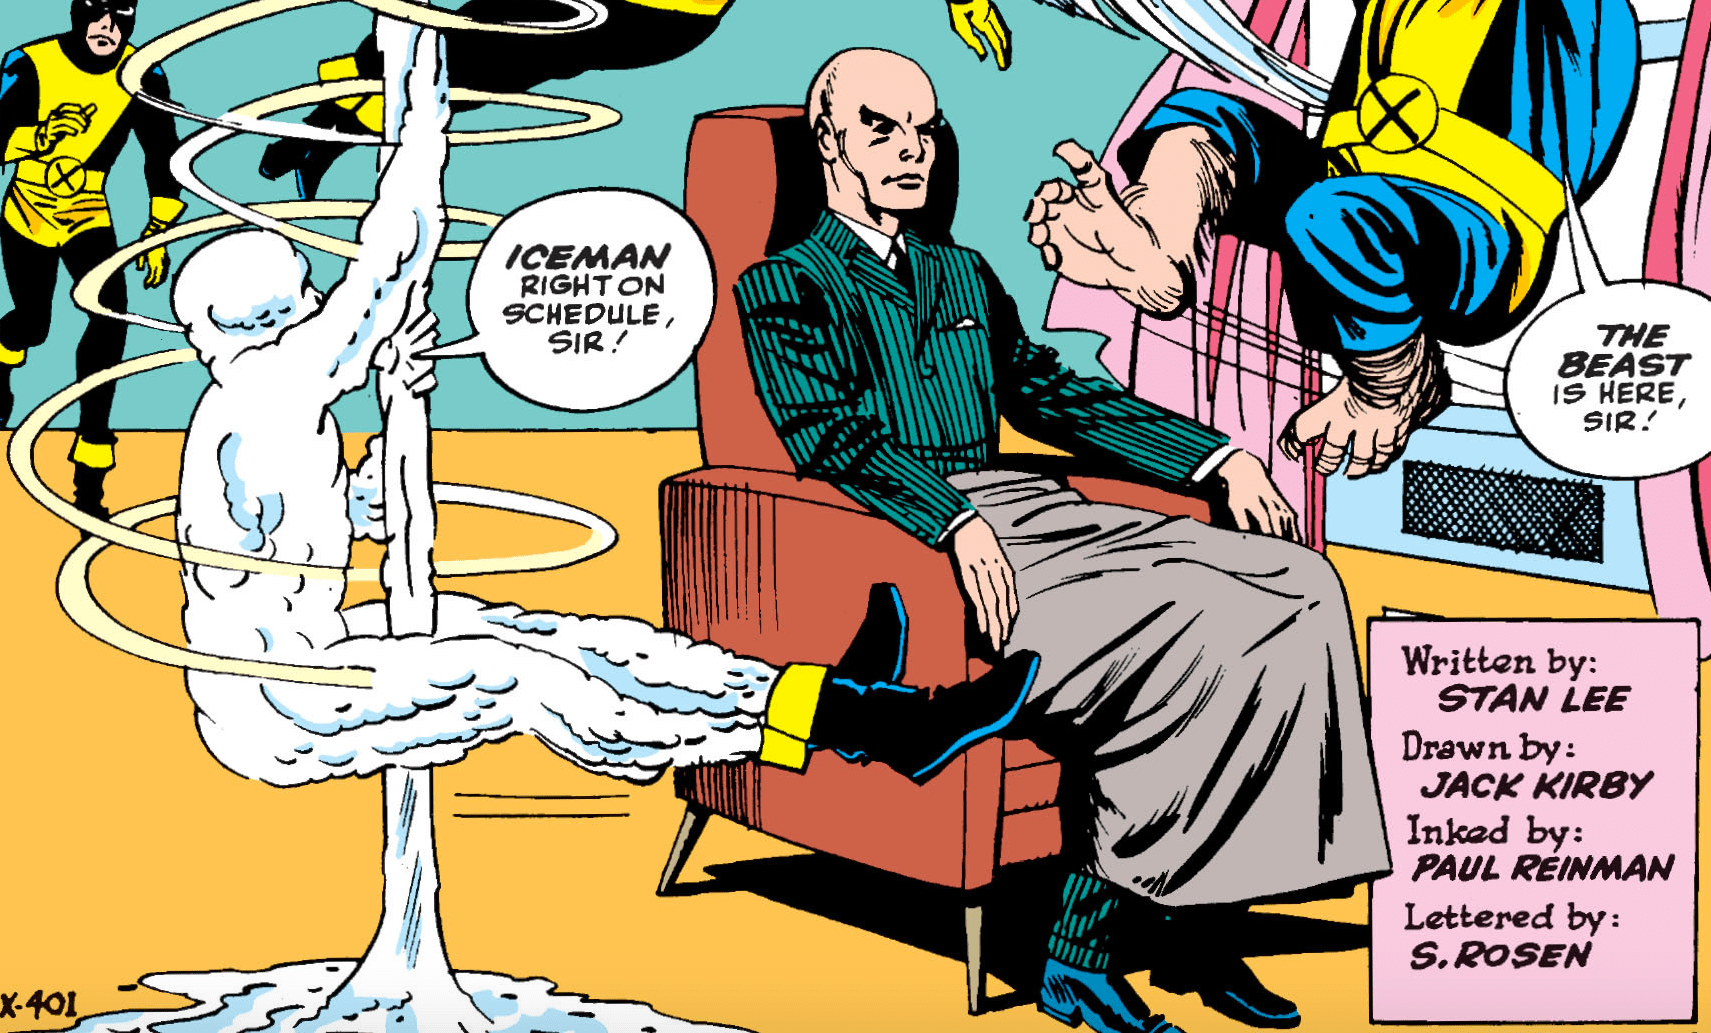 How Does X-Men’s Charles Xavier Leave His Own House?